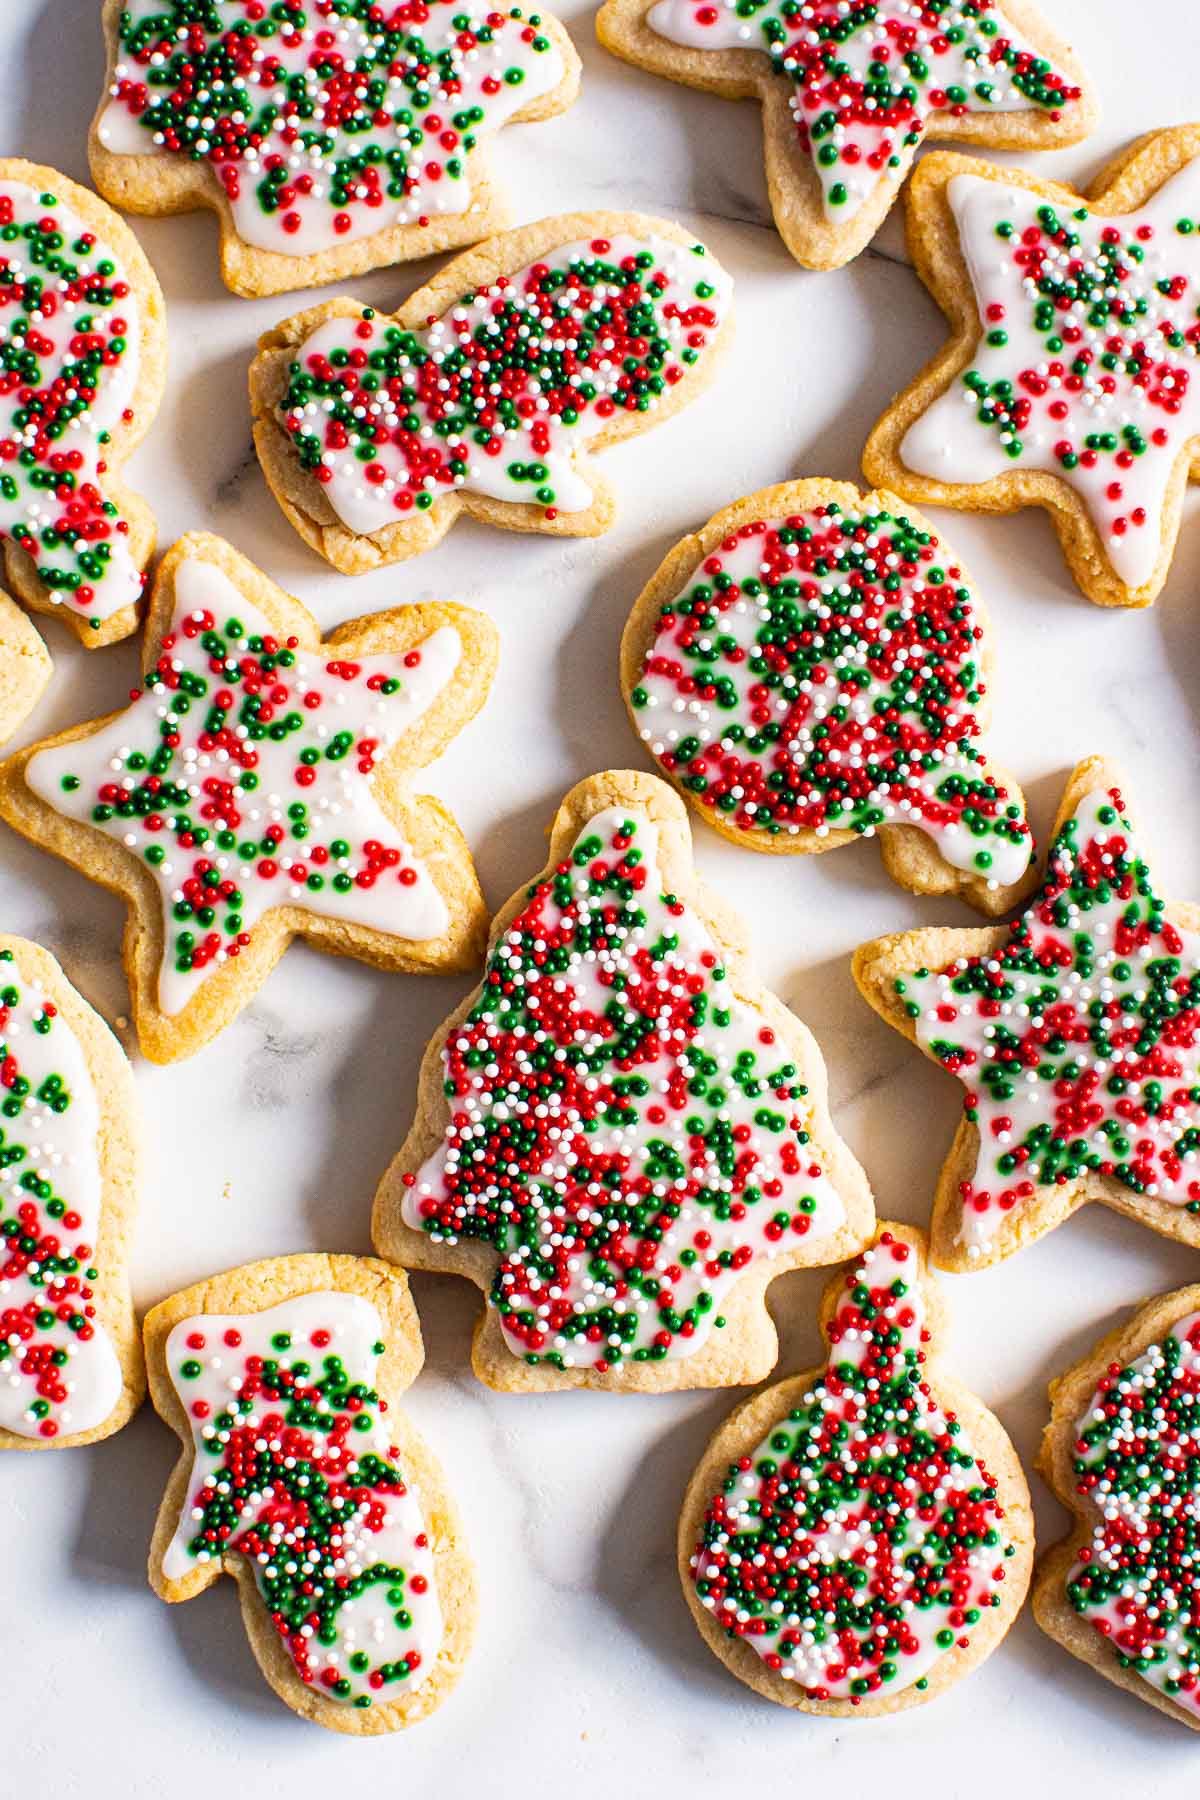 21 Healthy Christmas Cookies" />
	
	
	
	
	
	
	
	
	
	
	
	
	
	{"@context":"https://schema.org","@graph":[{"@type":"Organization","@id":"https://ifoodreal.com/#organization","name":"iFoodreal","url":"https://ifoodreal.com/","sameAs":["https://www.facebook.com/iFOODreal/","https://www.instagram.com/ifoodreal/","https://www.pinterest.com/ifoodreal/","https://twitter.com/ifoodreal"],"logo":{"@type":"ImageObject","@id":"https://ifoodreal.com/#logo","inLanguage":"en-US","url":"https://ifoodreal.com/wp-content/uploads/2017/11/ifrLogo-1.png","contentUrl":"https://ifoodreal.com/wp-content/uploads/2017/11/ifrLogo-1.png","width":150,"height":37,"caption":"iFoodreal"},"image":{"@id":"https://ifoodreal.com/#logo"}},{"@type":"WebSite","@id":"https://ifoodreal.com/#website","url":"https://ifoodreal.com/","name":"iFOODreal.com","description":"","publisher":{"@id":"https://ifoodreal.com/#organization"},"potentialAction":[{"@type":"SearchAction","target":{"@type":"EntryPoint","urlTemplate":"https://ifoodreal.com/?s={search_term_string}"},"query-input":"required name=search_term_string"}],"inLanguage":"en-US"},{"@type":"ImageObject","@id":"https://ifoodreal.com/healthy-christmas-cookies/#primaryimage","inLanguage":"en-US","url":"https://ifoodreal.com/wp-content/uploads/2021/12/healthy_christmas_cookies.jpg","contentUrl":"https://ifoodreal.com/wp-content/uploads/2021/12/healthy_christmas_cookies.jpg","width":1250,"height":1250},{"@type":"WebPage","@id":"https://ifoodreal.com/healthy-christmas-cookies/#webpage","url":"https://ifoodreal.com/healthy-christmas-cookies/","name":"21 Healthy Christmas Cookies